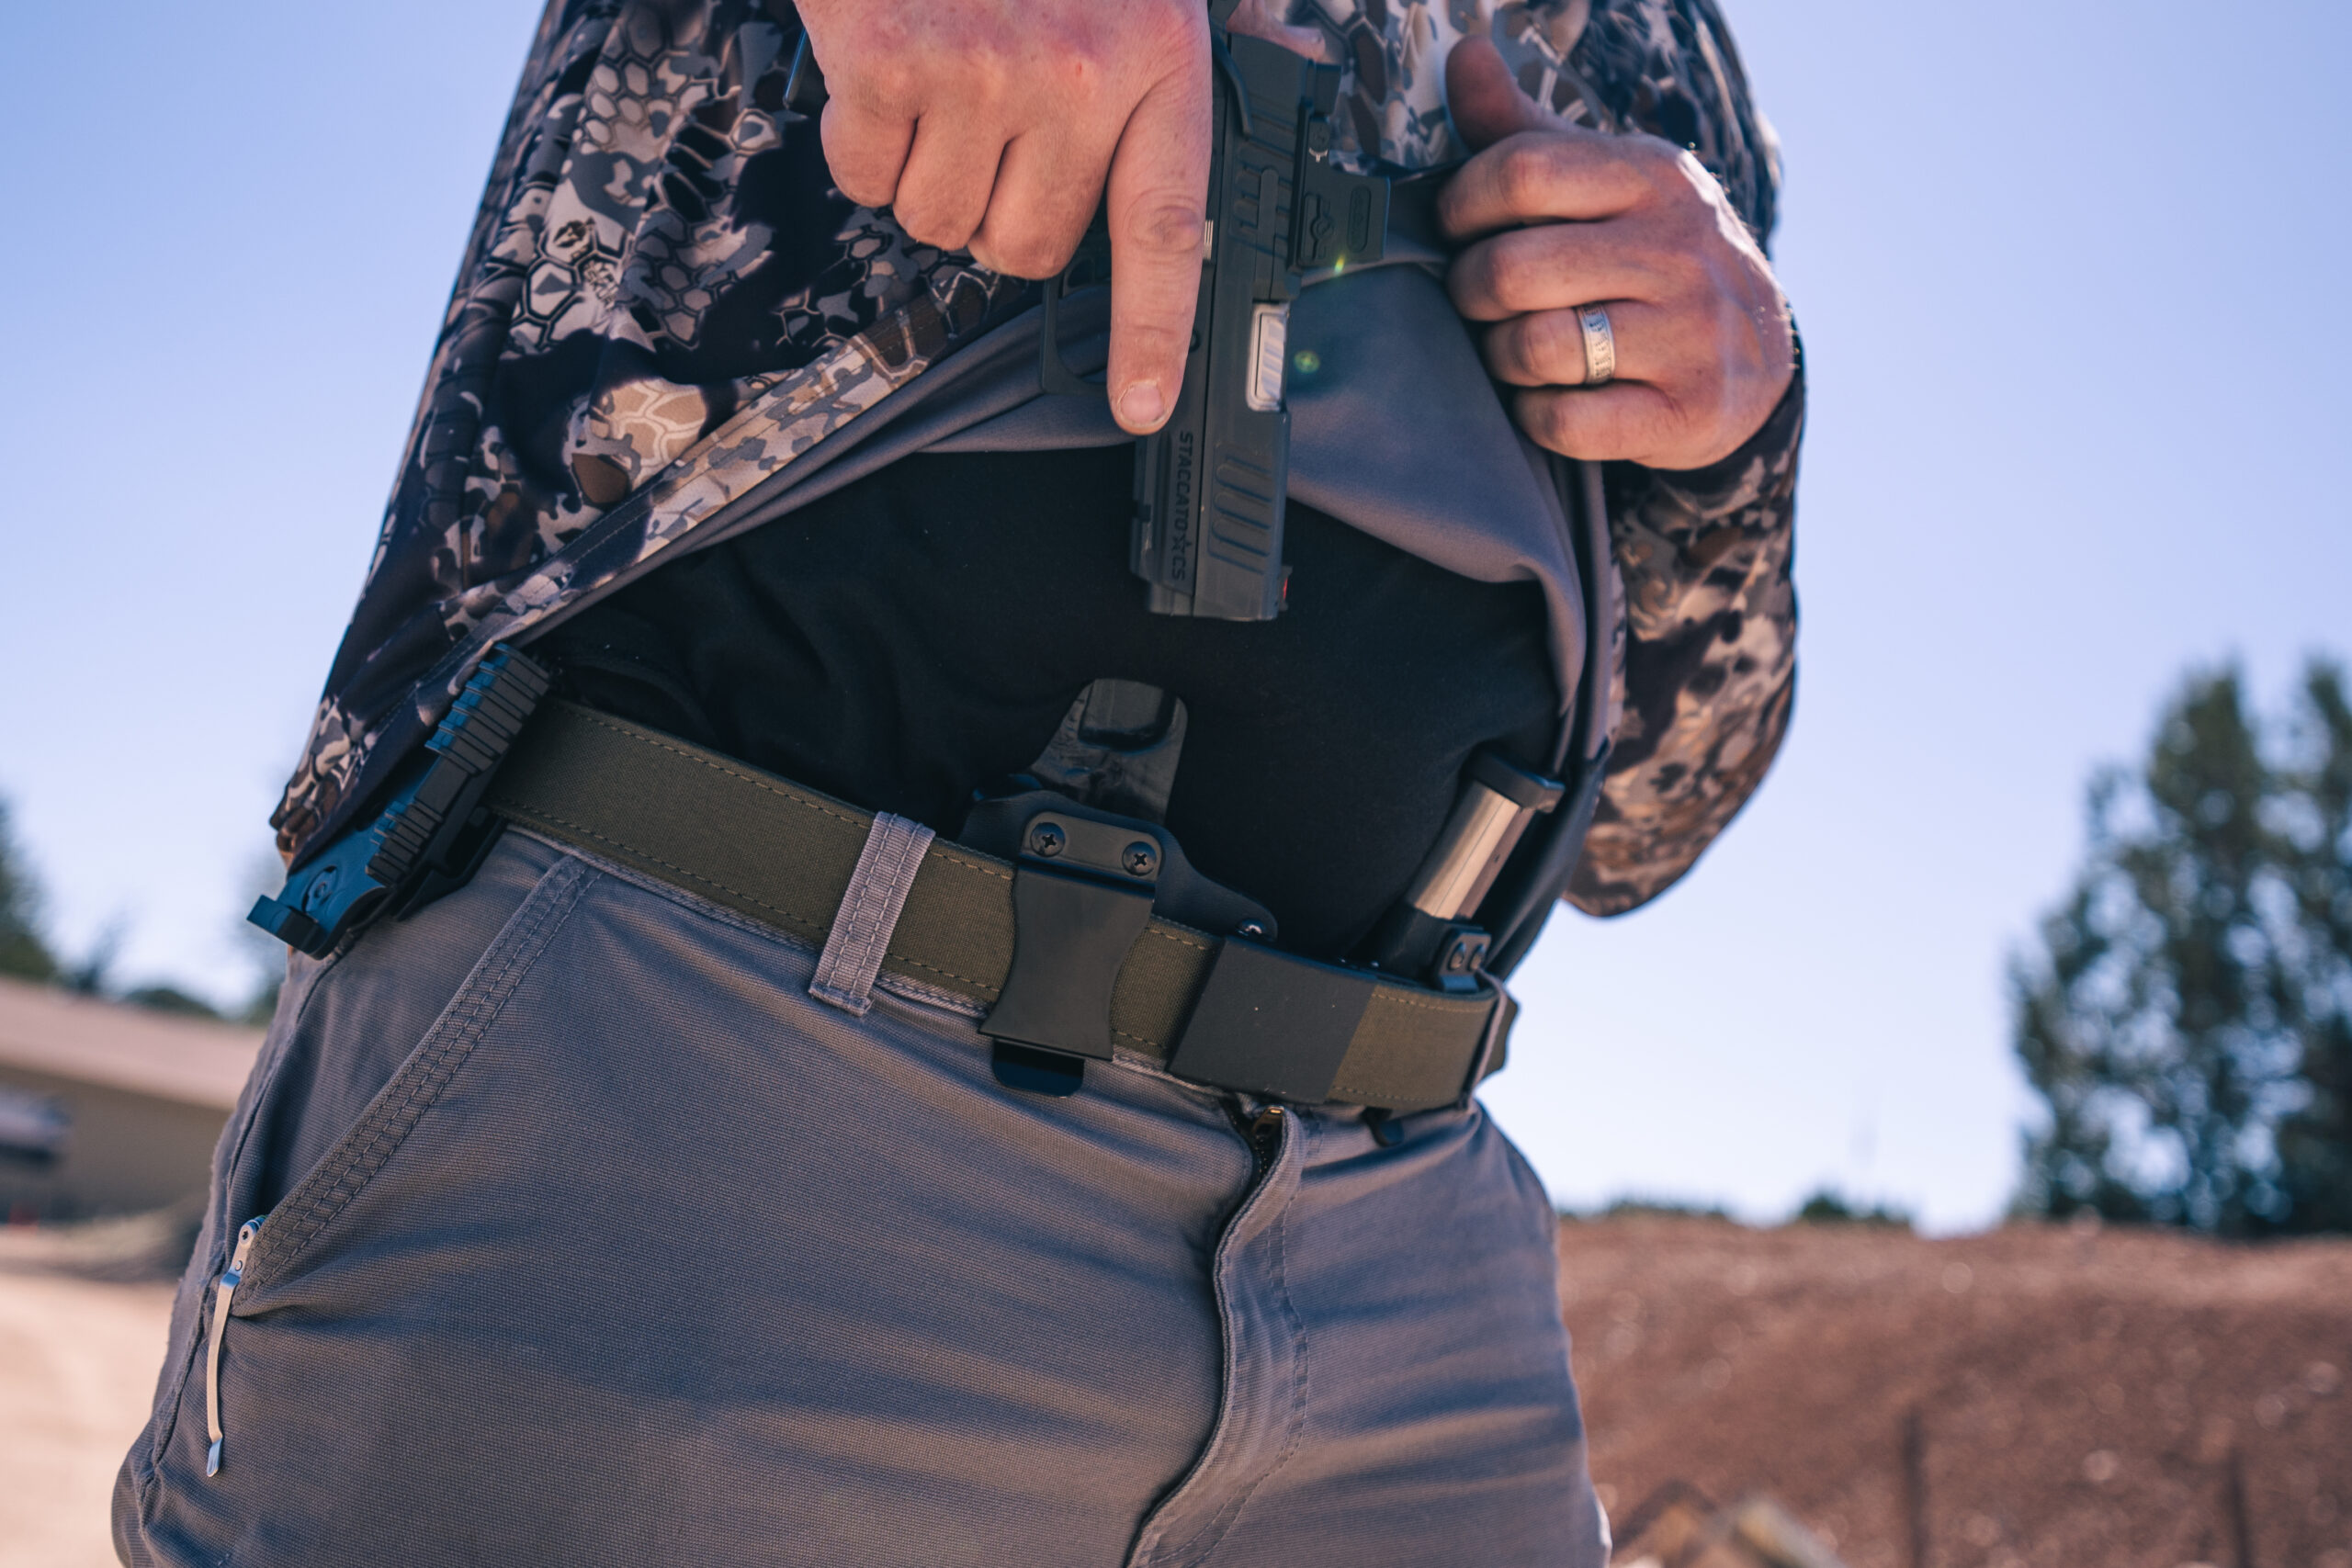 How A Former Fashion Model Designed Concealed-Carry Running Shorts